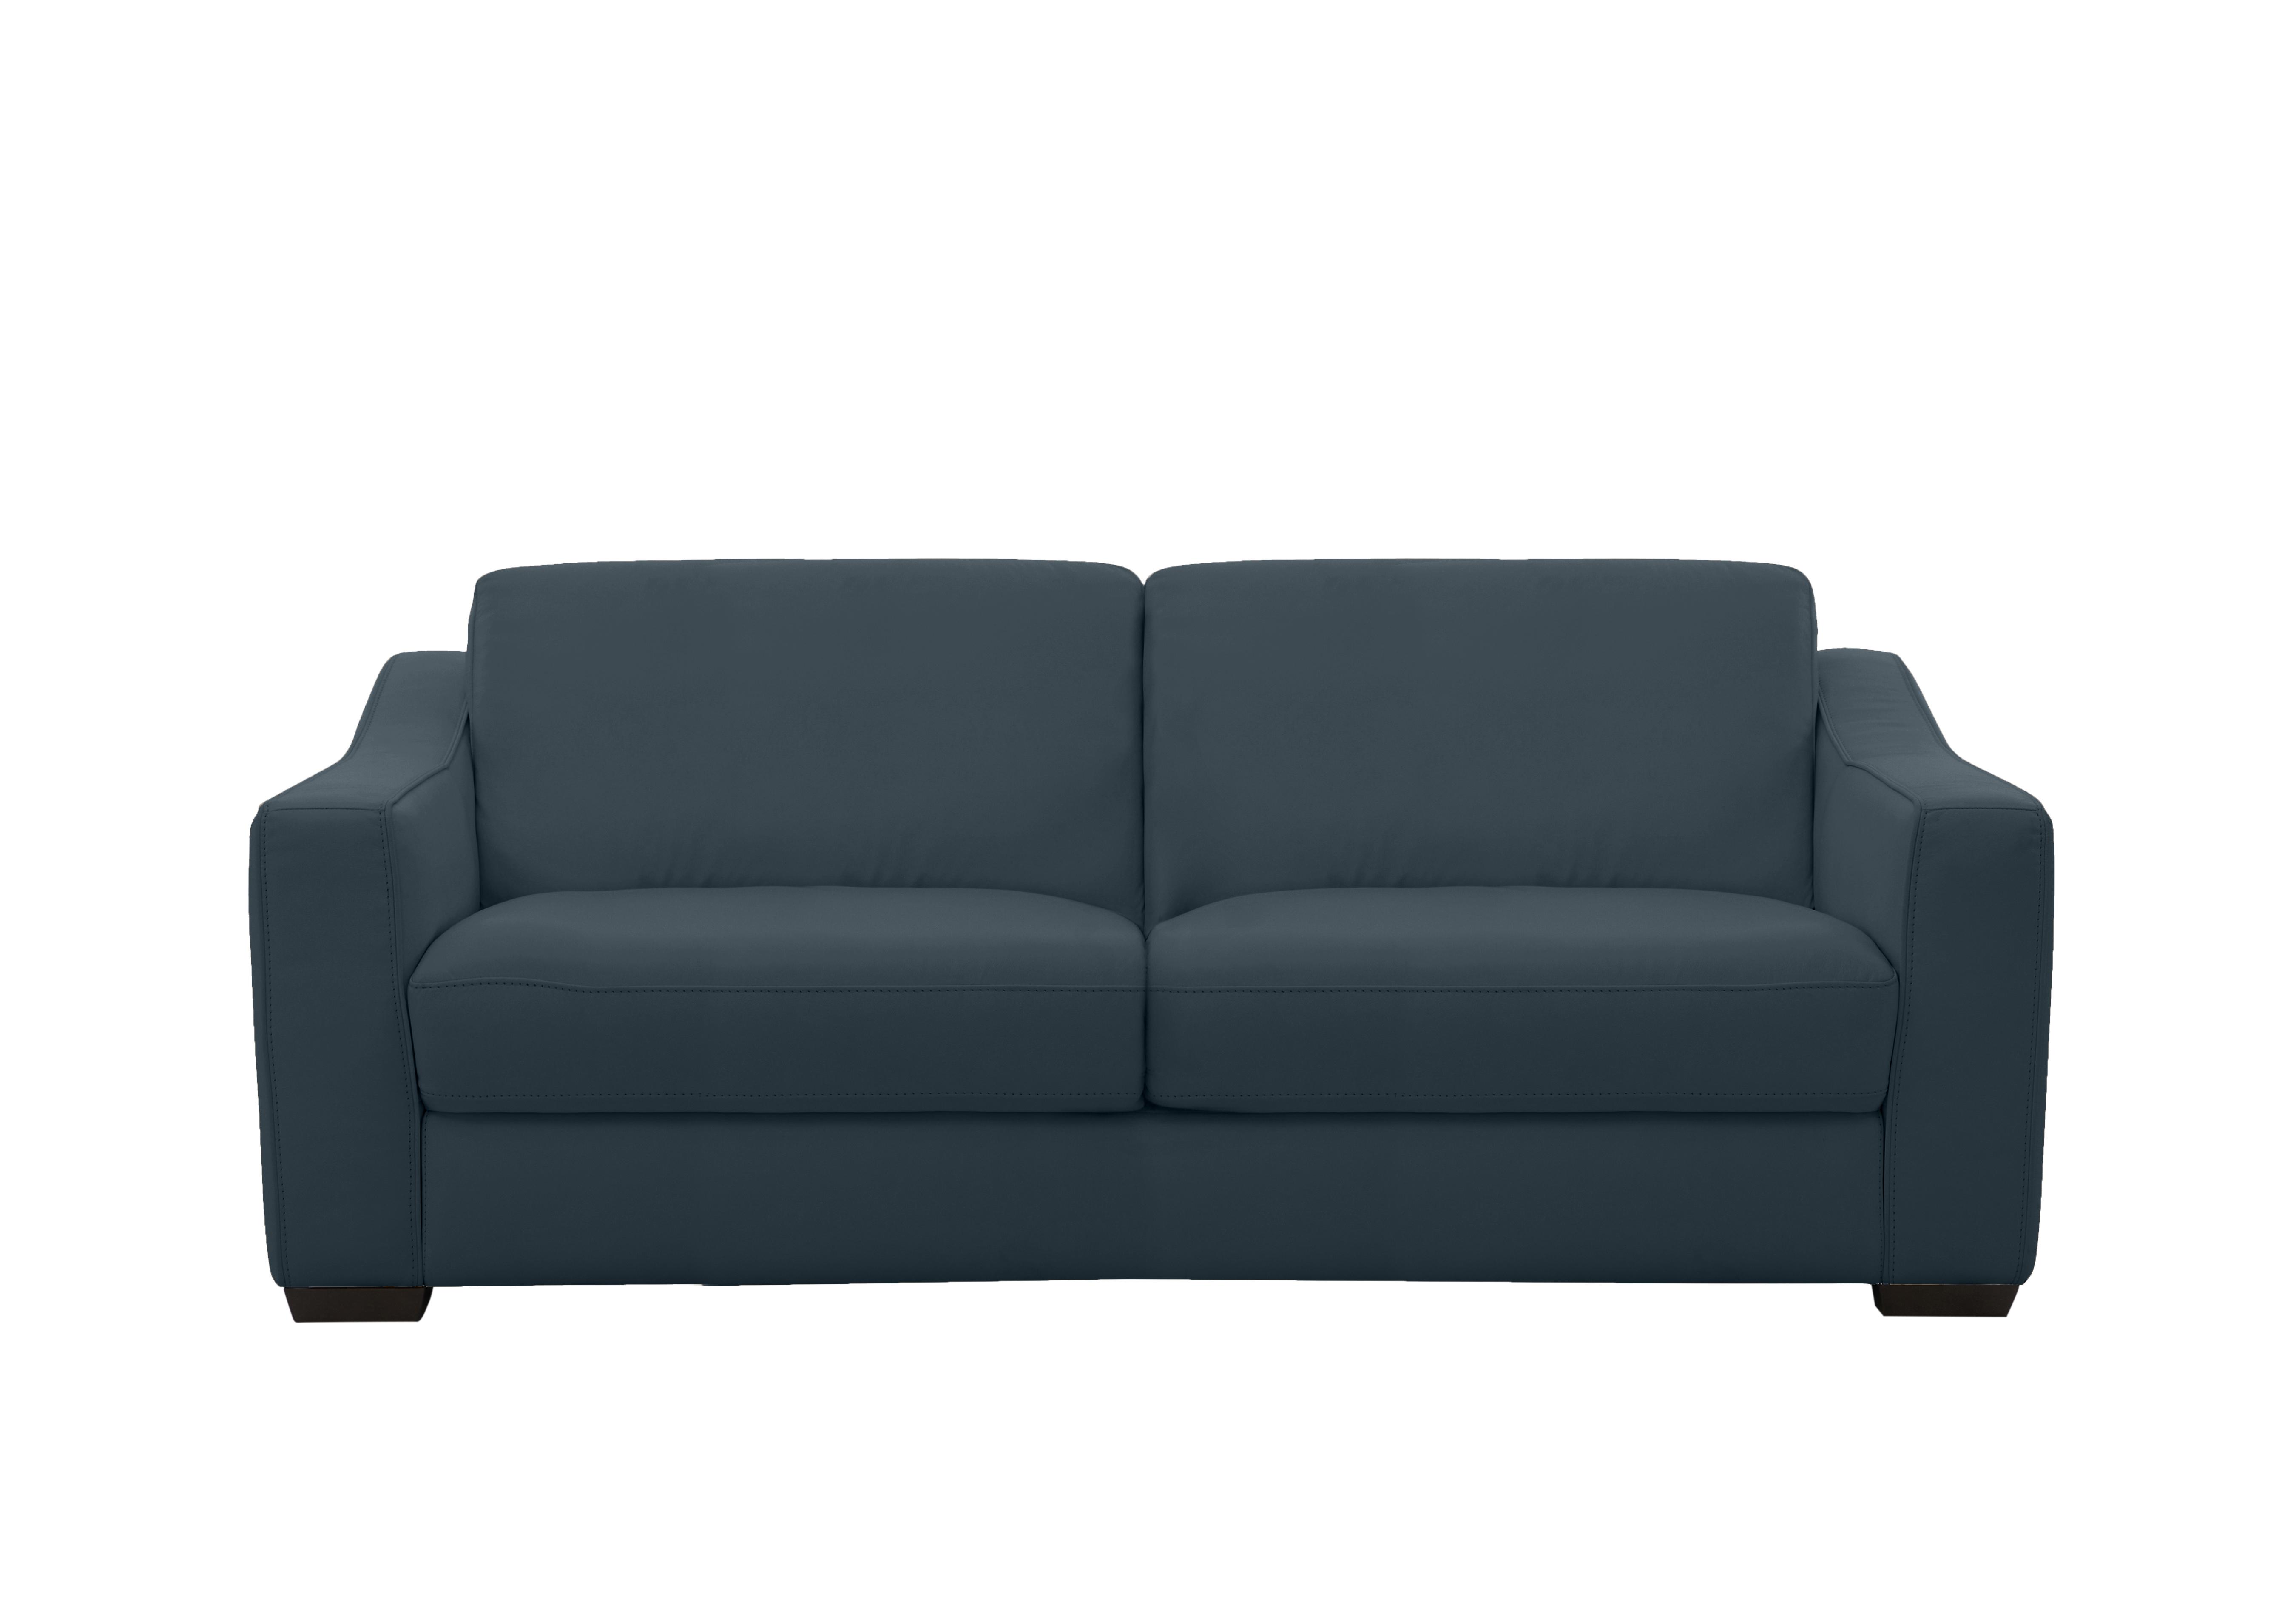 Optimus Space Saving Leather Sofa Bed with Memory Foam Mattress in Bv-313e Ocean Blue on Furniture Village